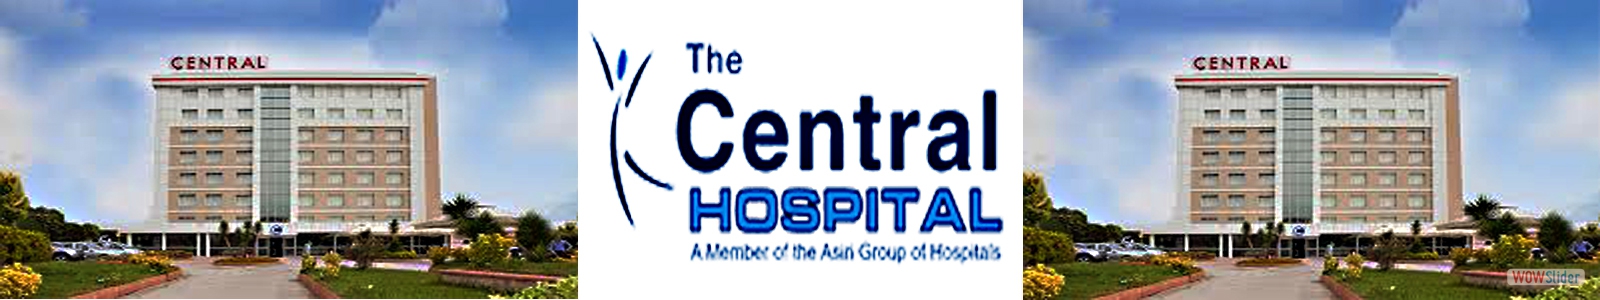 central_hospital_intro_image-2